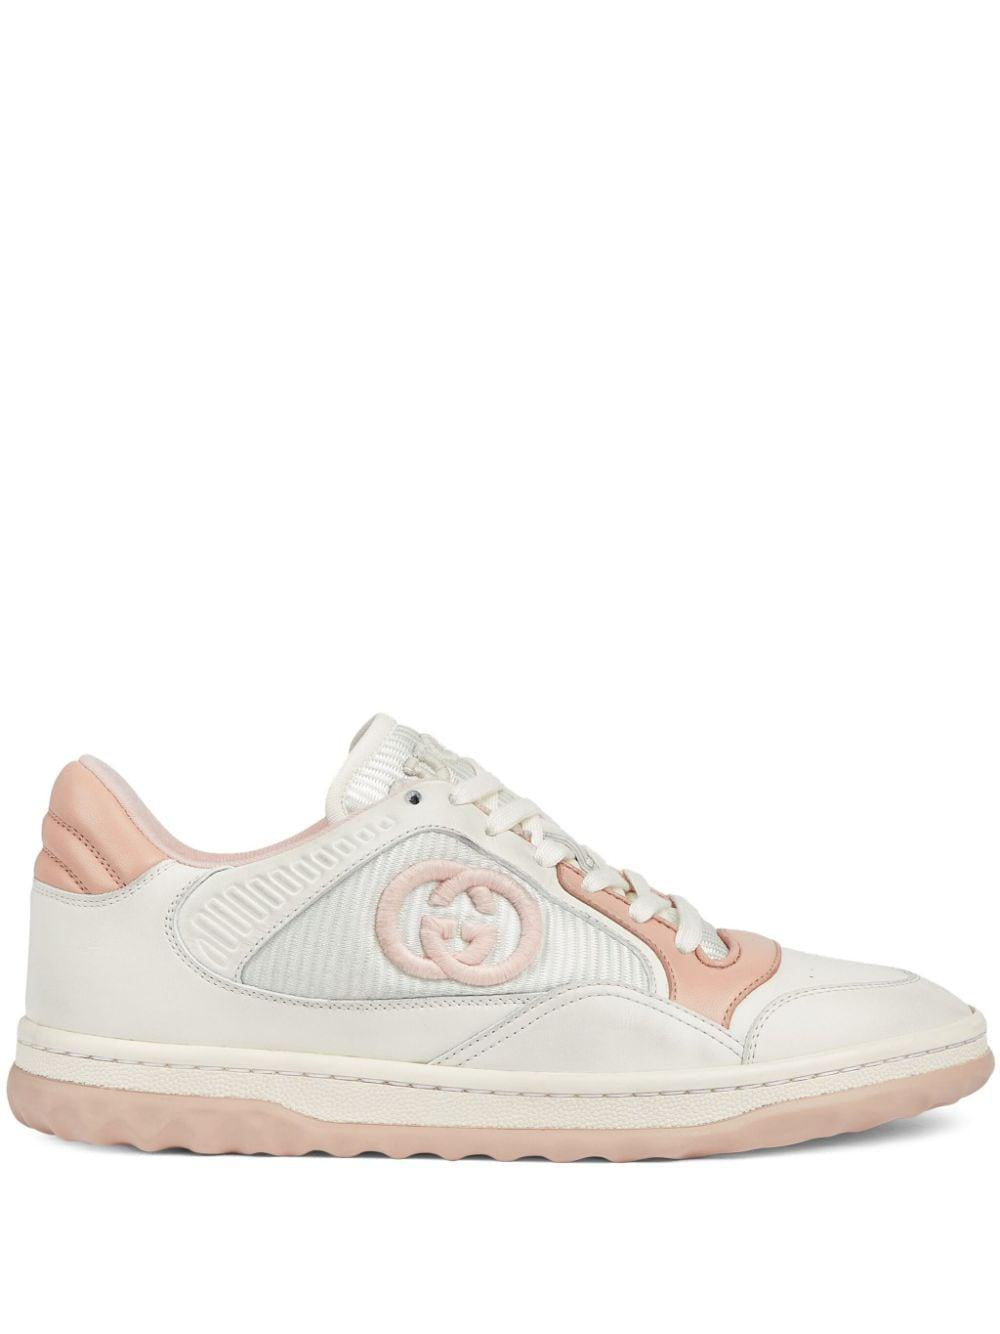 GUCCI Vintage Low-Top Sneaker in Pink for Women